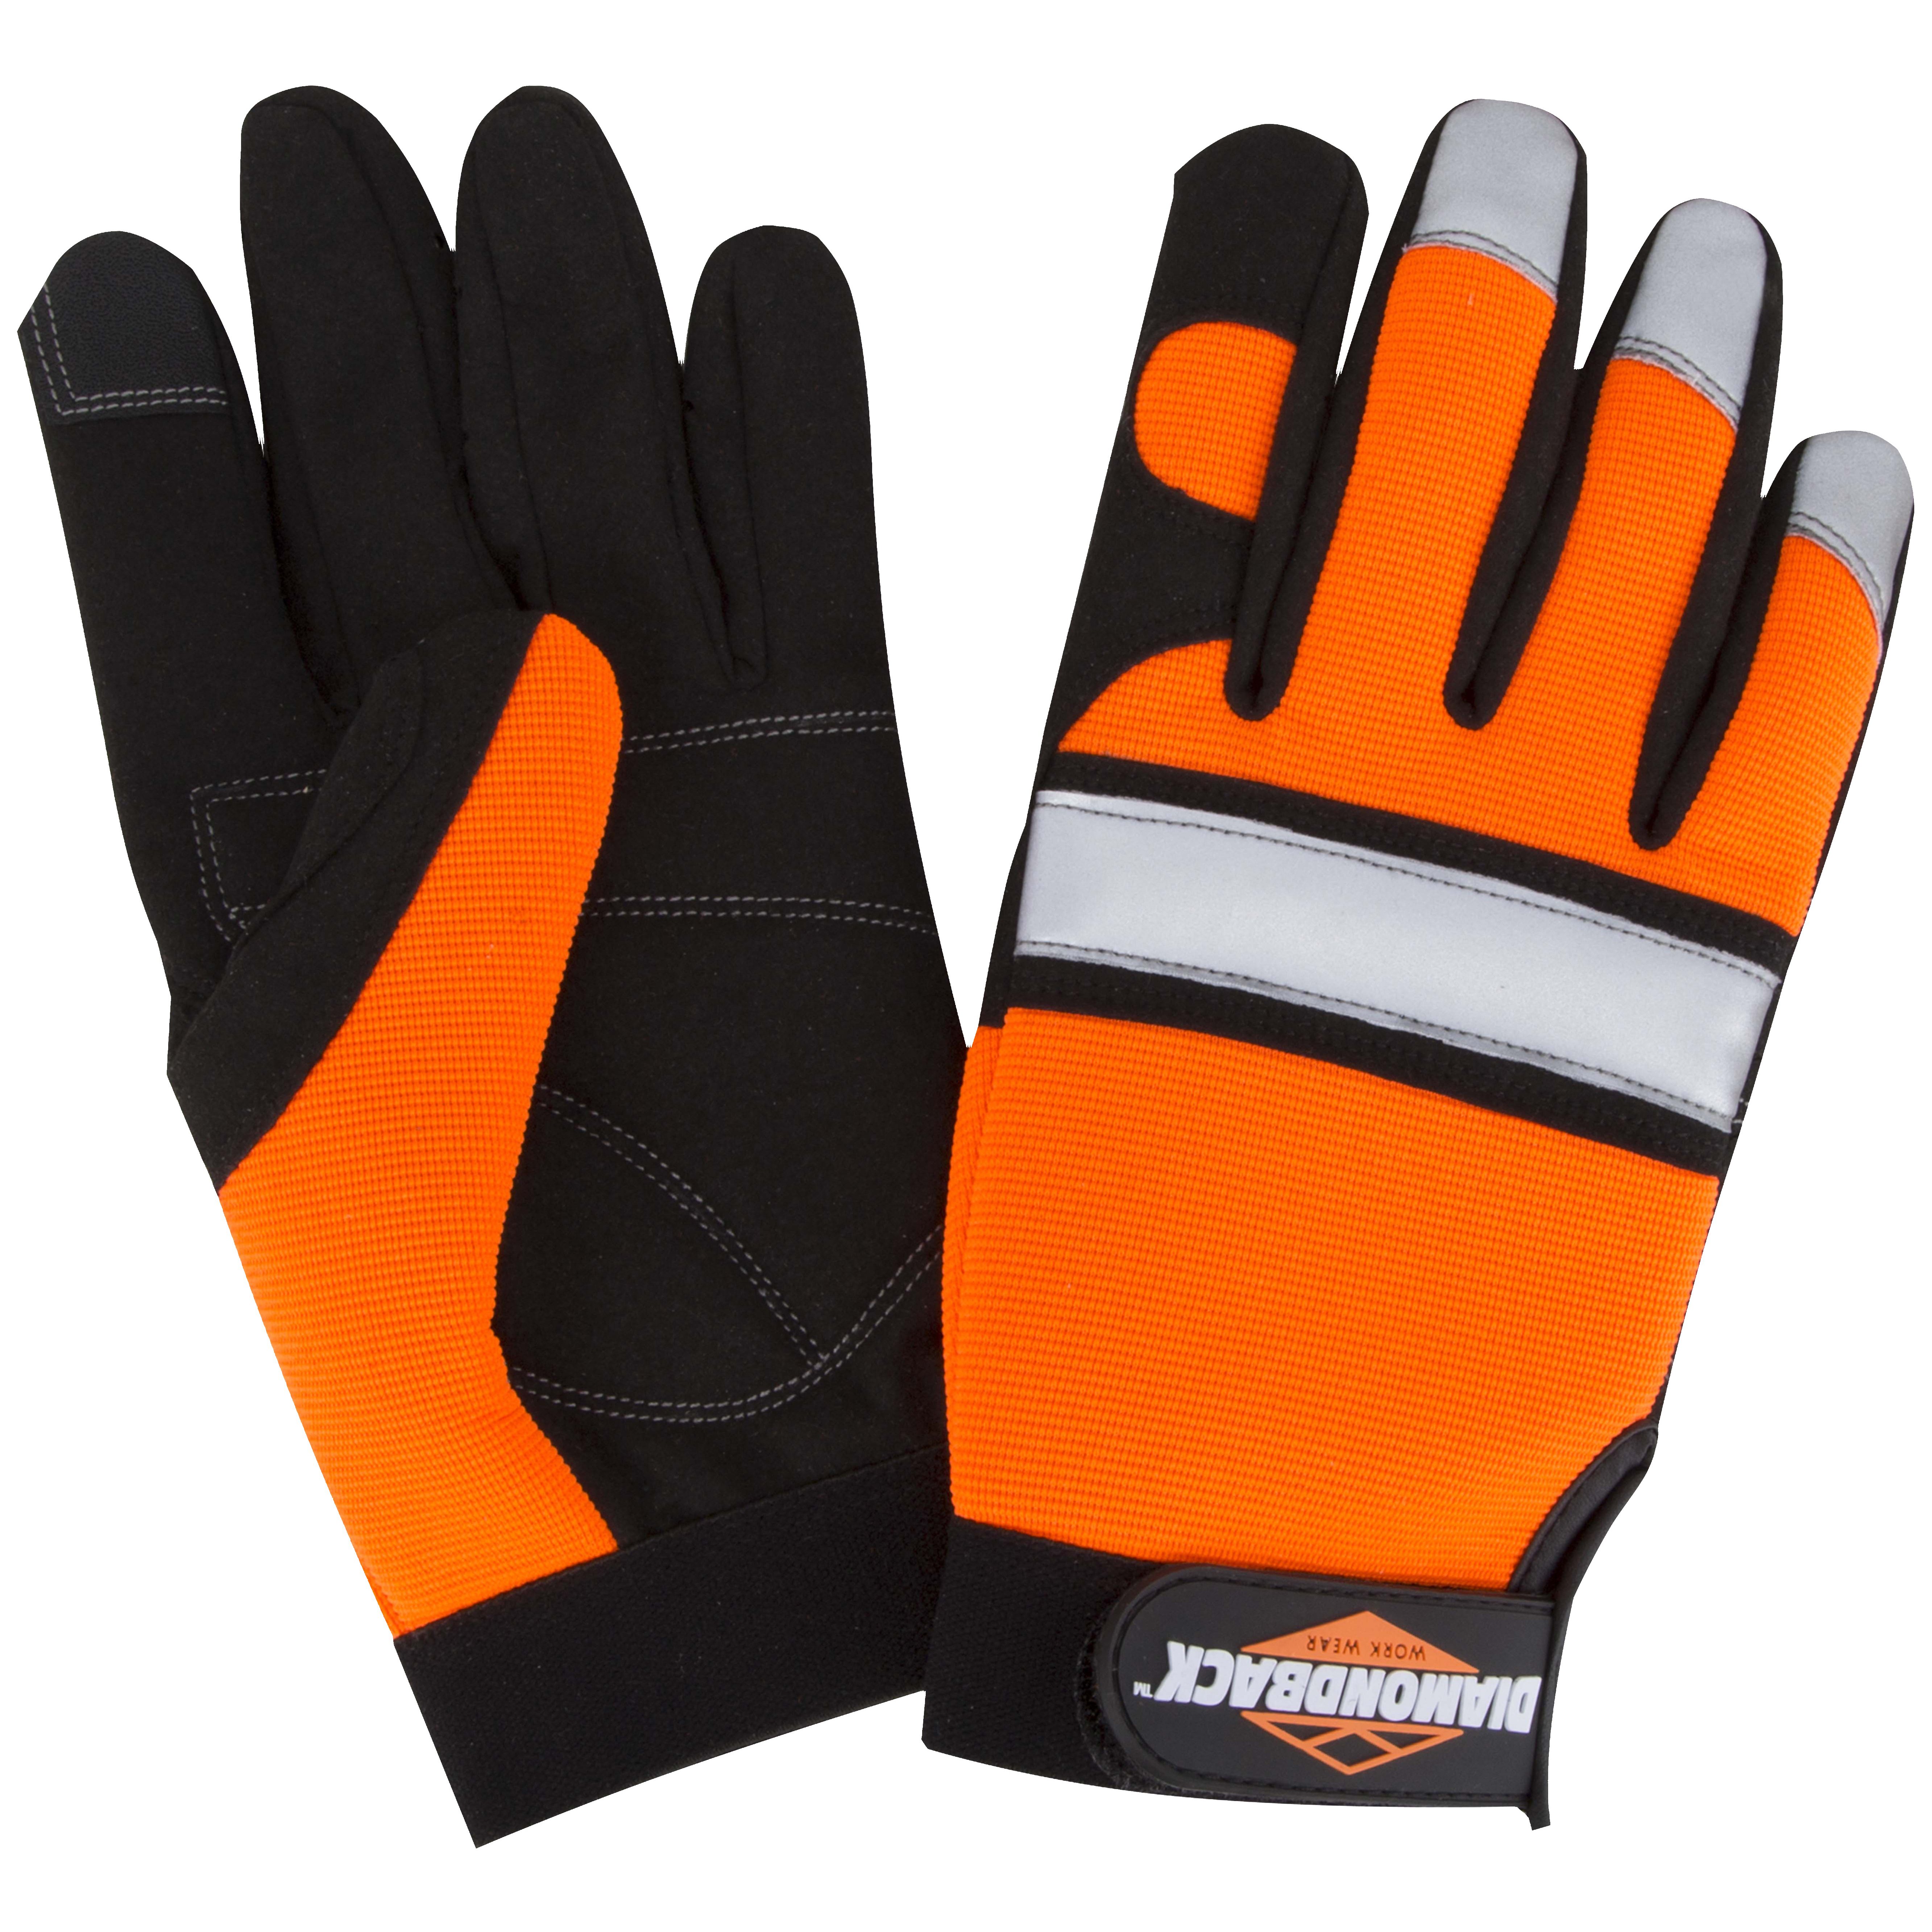 5959M Touchscreen Hi Visibility Mechanics Gloves, M, 55% Synthetic Leather 30% Spandex 10% Reflective Fabric 5% Elastic Band